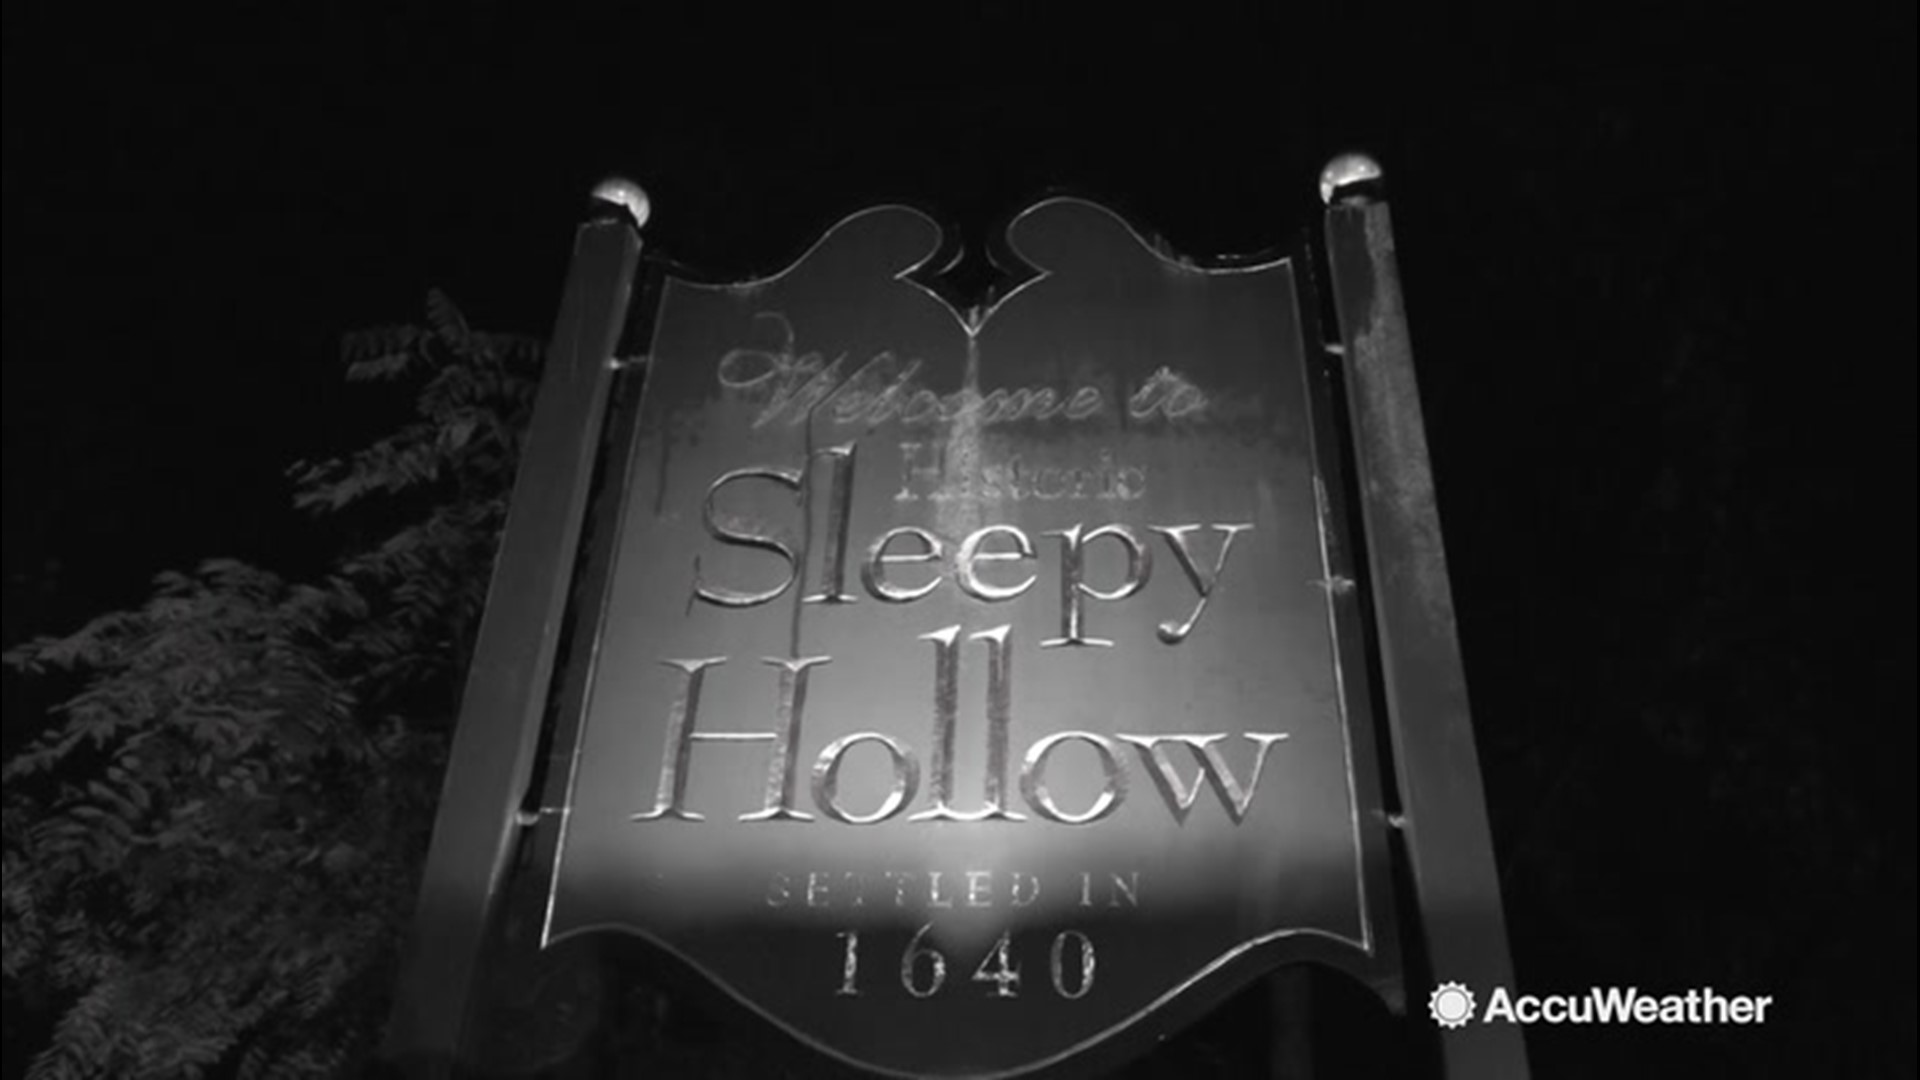 What really happened in 'The Legend of Sleepy Hollow'? Was Ichabod Crane spooked by the weather, killed by a ghostly specter, or murdered by his romantic rival?